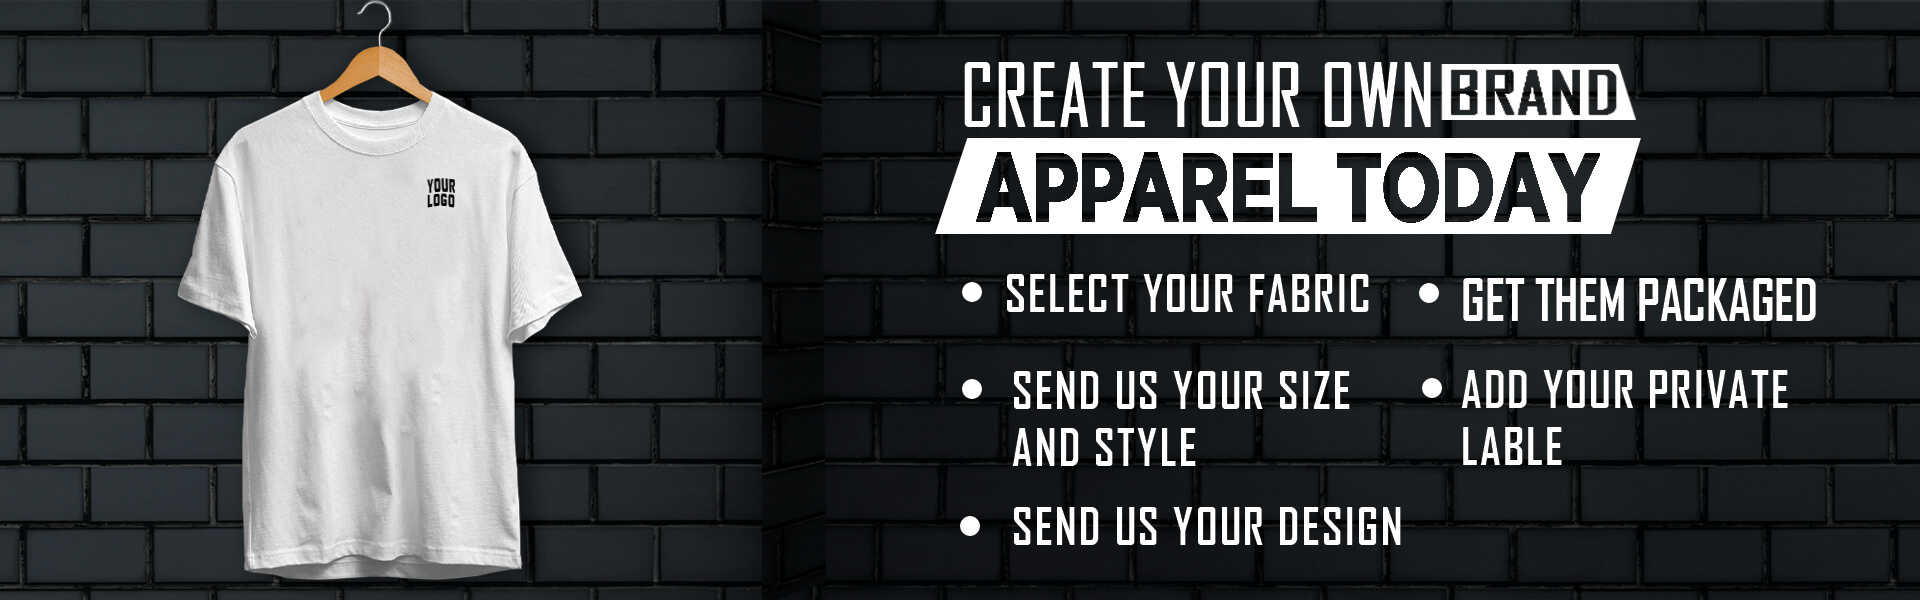 Create Your Own Clothing Brand